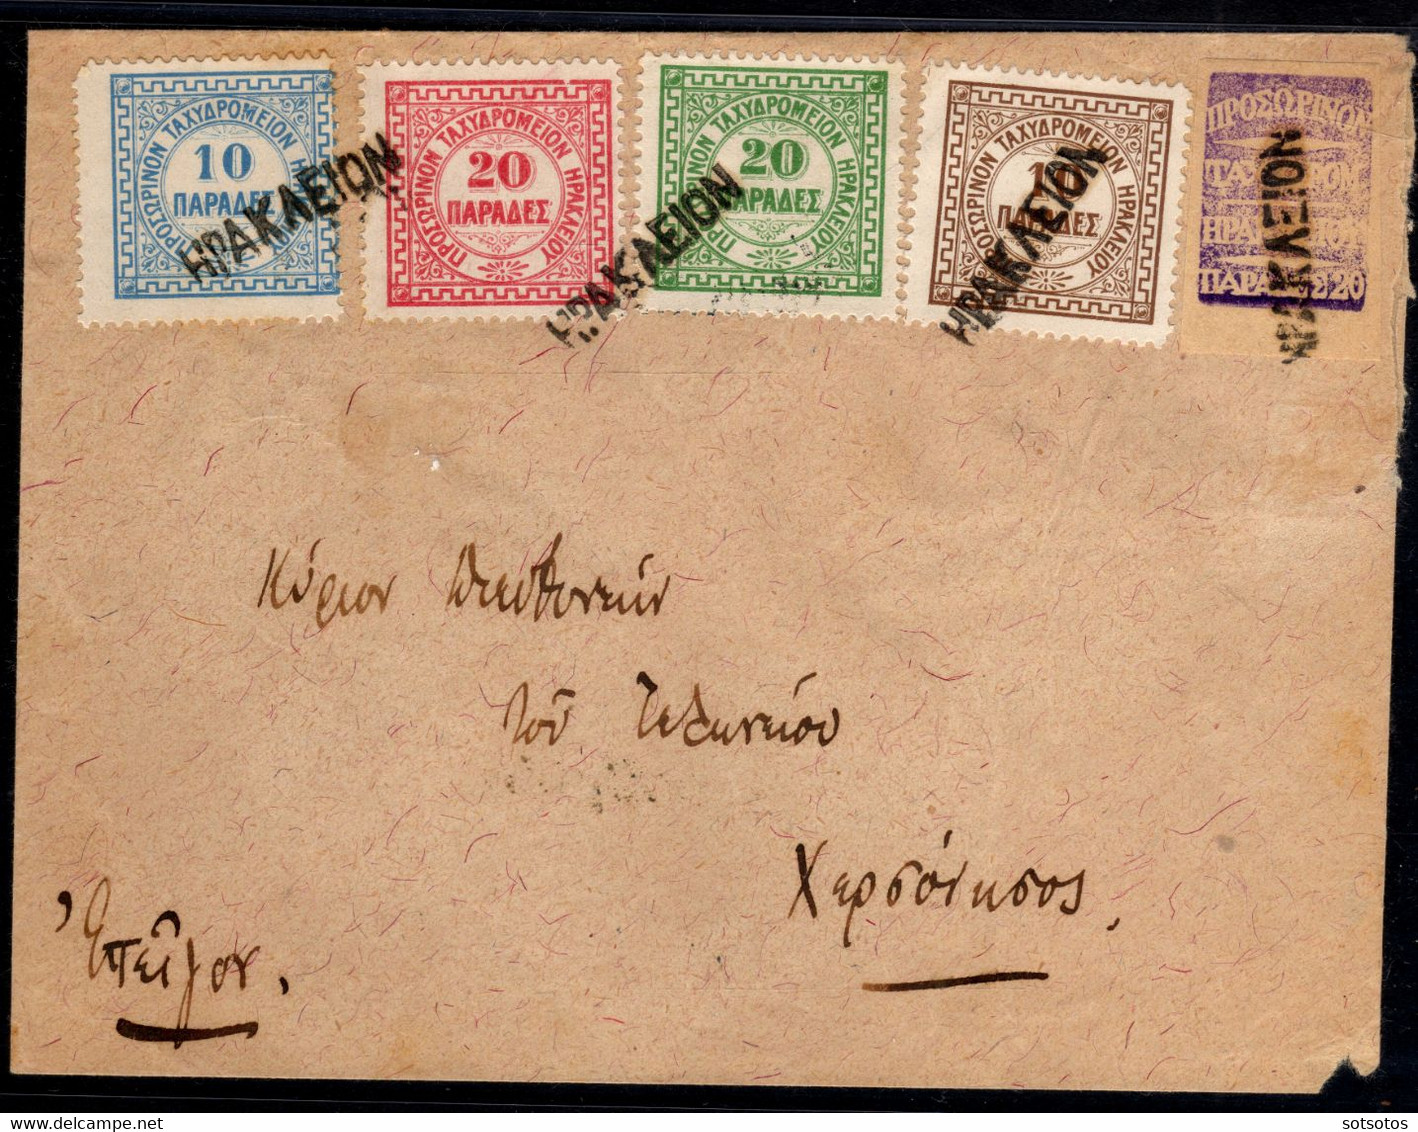 CRETE 1898: The Rarest Cover Of Cretan Post Offices, Bearing All 5 Stamps Of The British Post Office In Crete - Crète